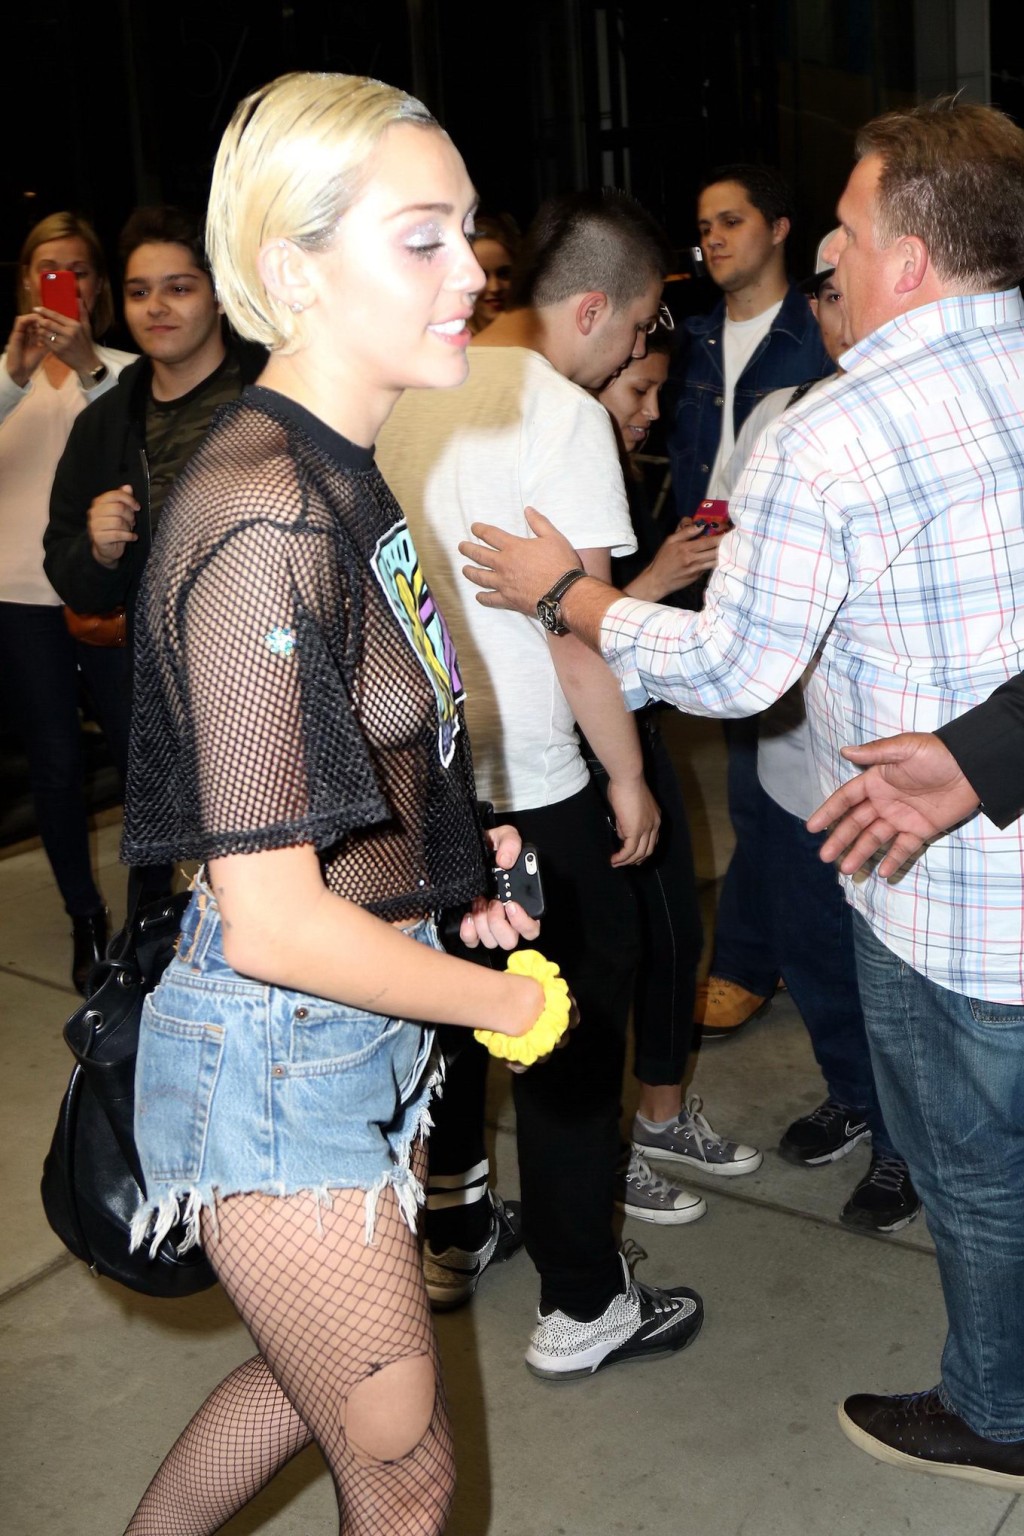 Miley Cyrus shows off her boobs wearing a mesh Tshirt out in NYC #75164209